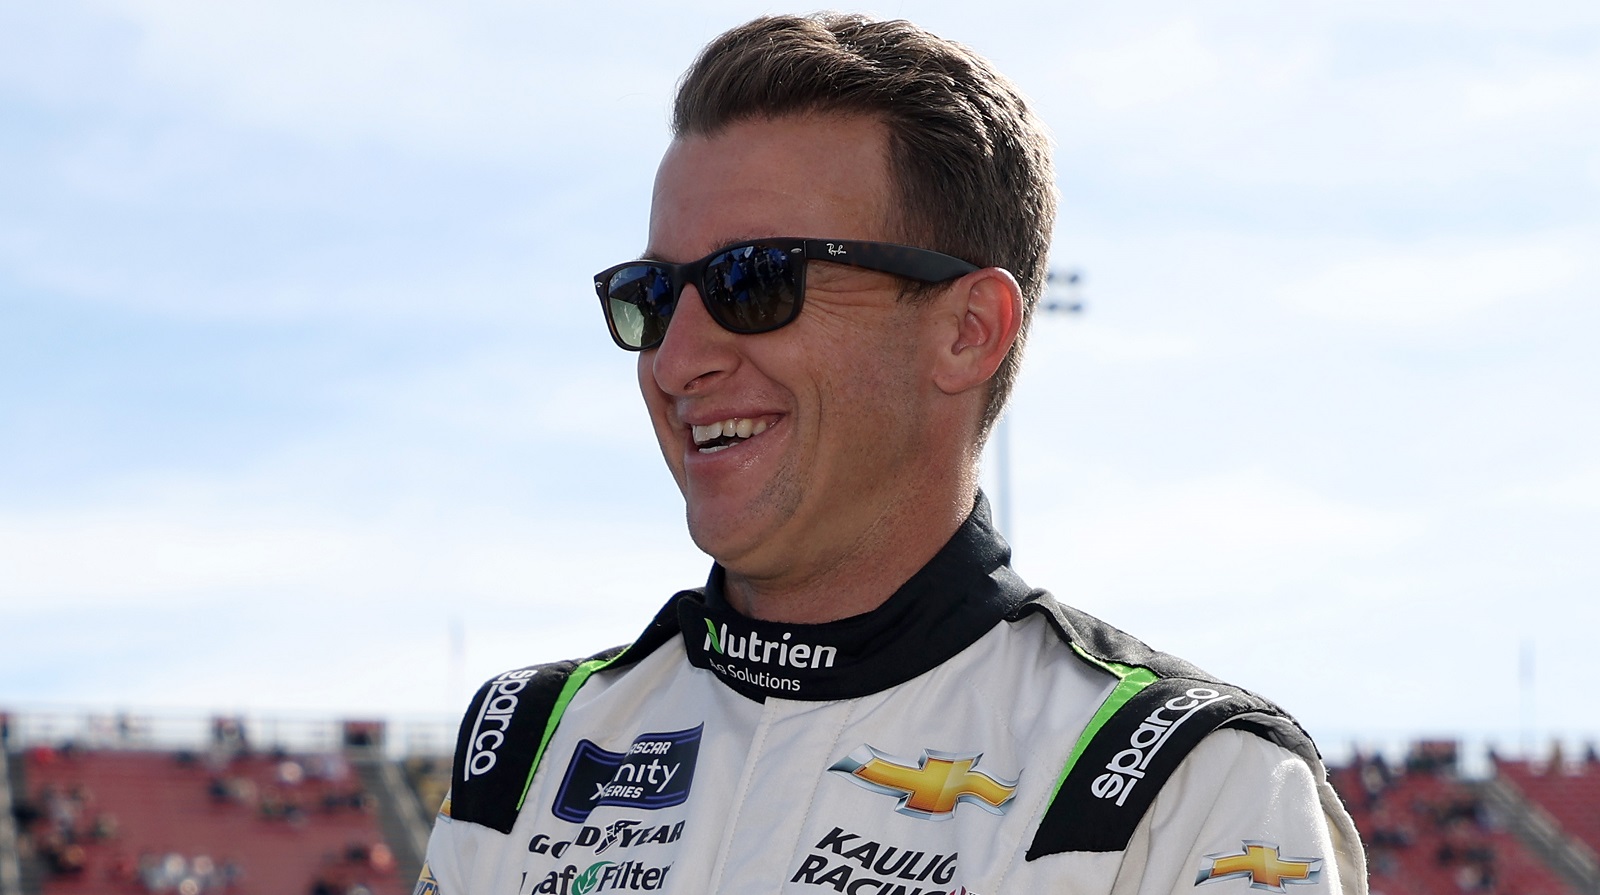 AJ Allmendinger laughs on the grid prior to the NASCAR Xfinity Series Production Alliance 300 at Auto Club Speedway on Feb. 26, 2022, in Fontana, California.